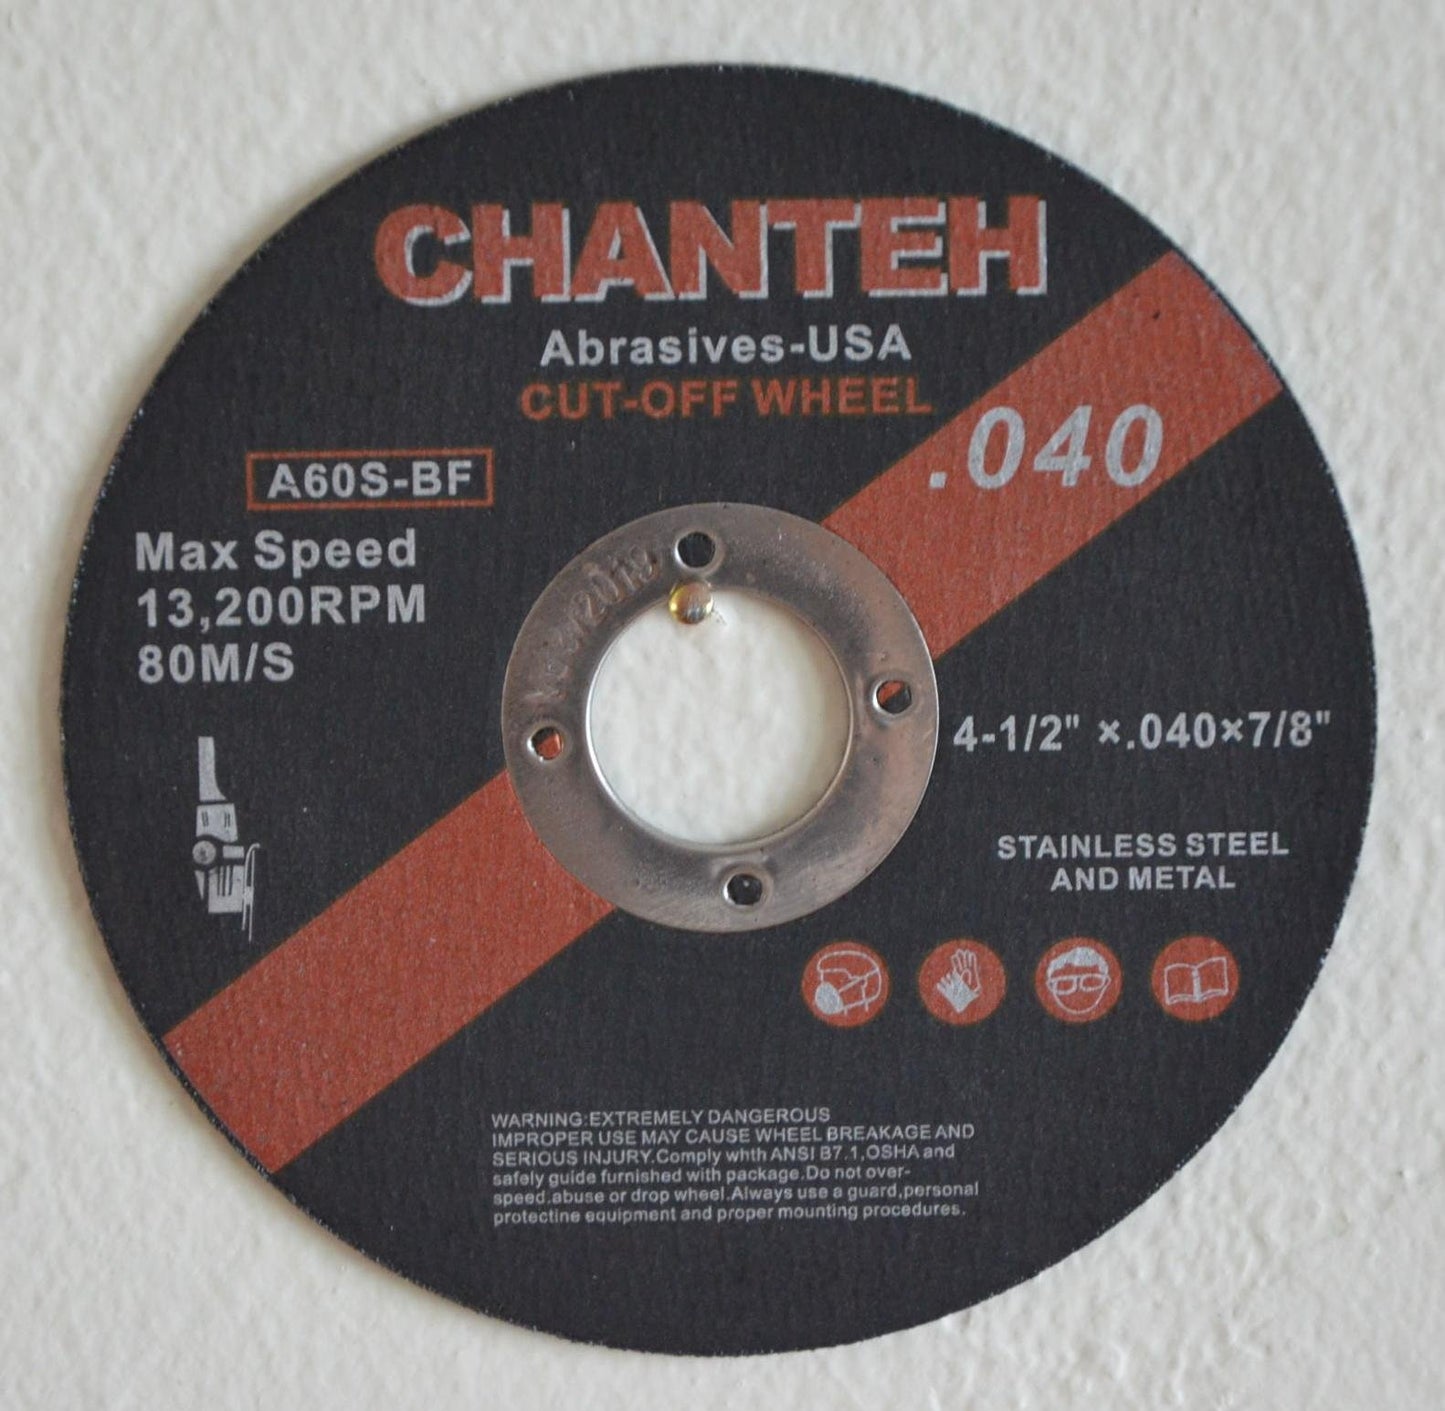 4-1/2" x .040" x 7/8" CUT-OFF WHEELS for Stainless Steel &.Metal Cutting Disc (25 PACK)